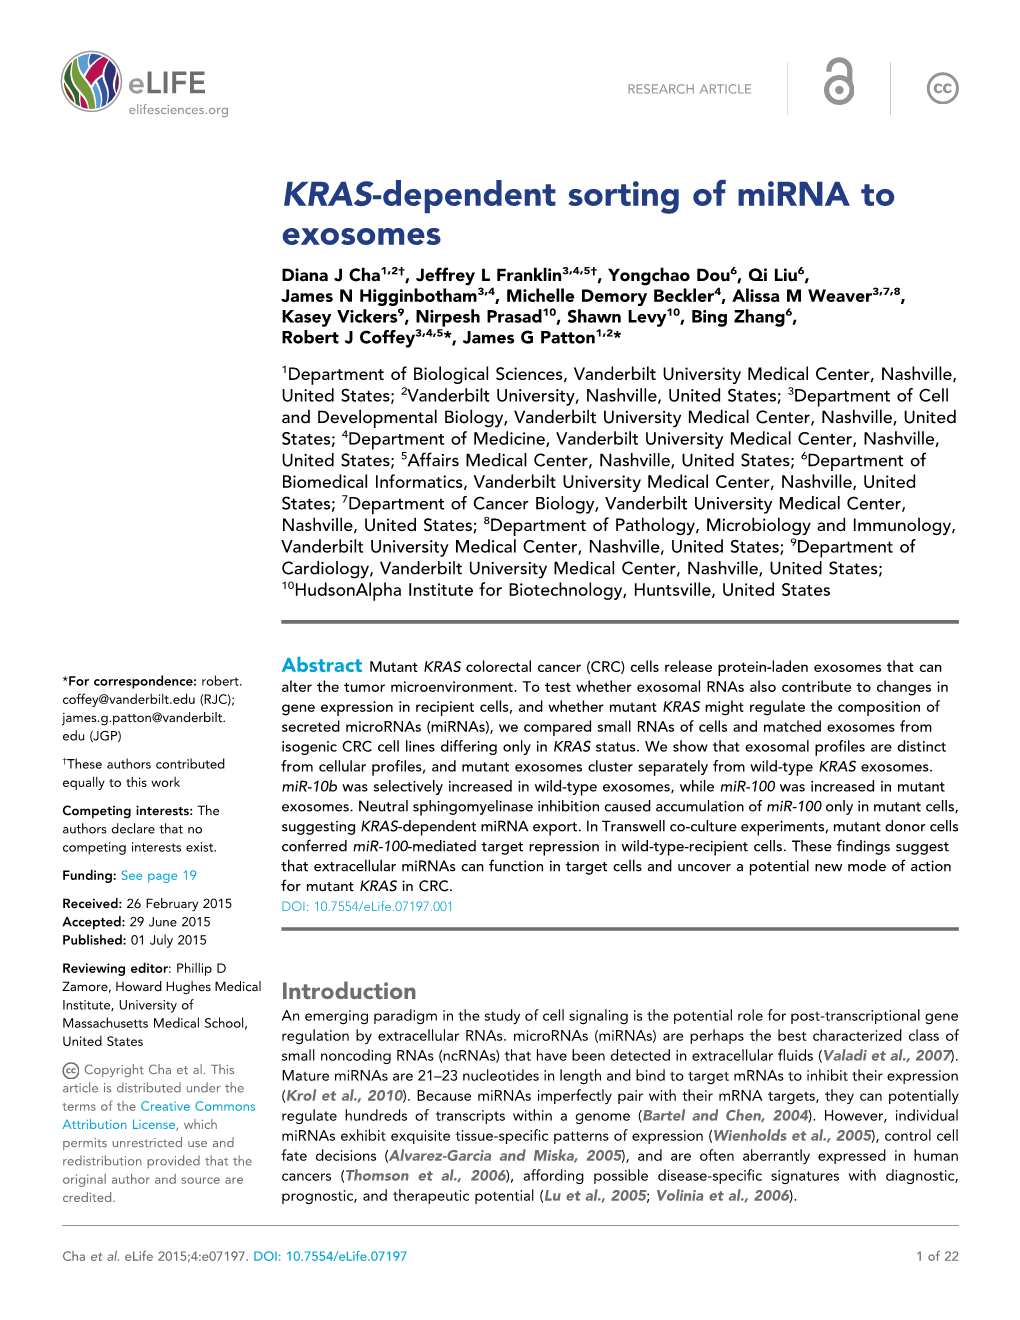 KRAS-Dependent Sorting of Mirna to Exosomes